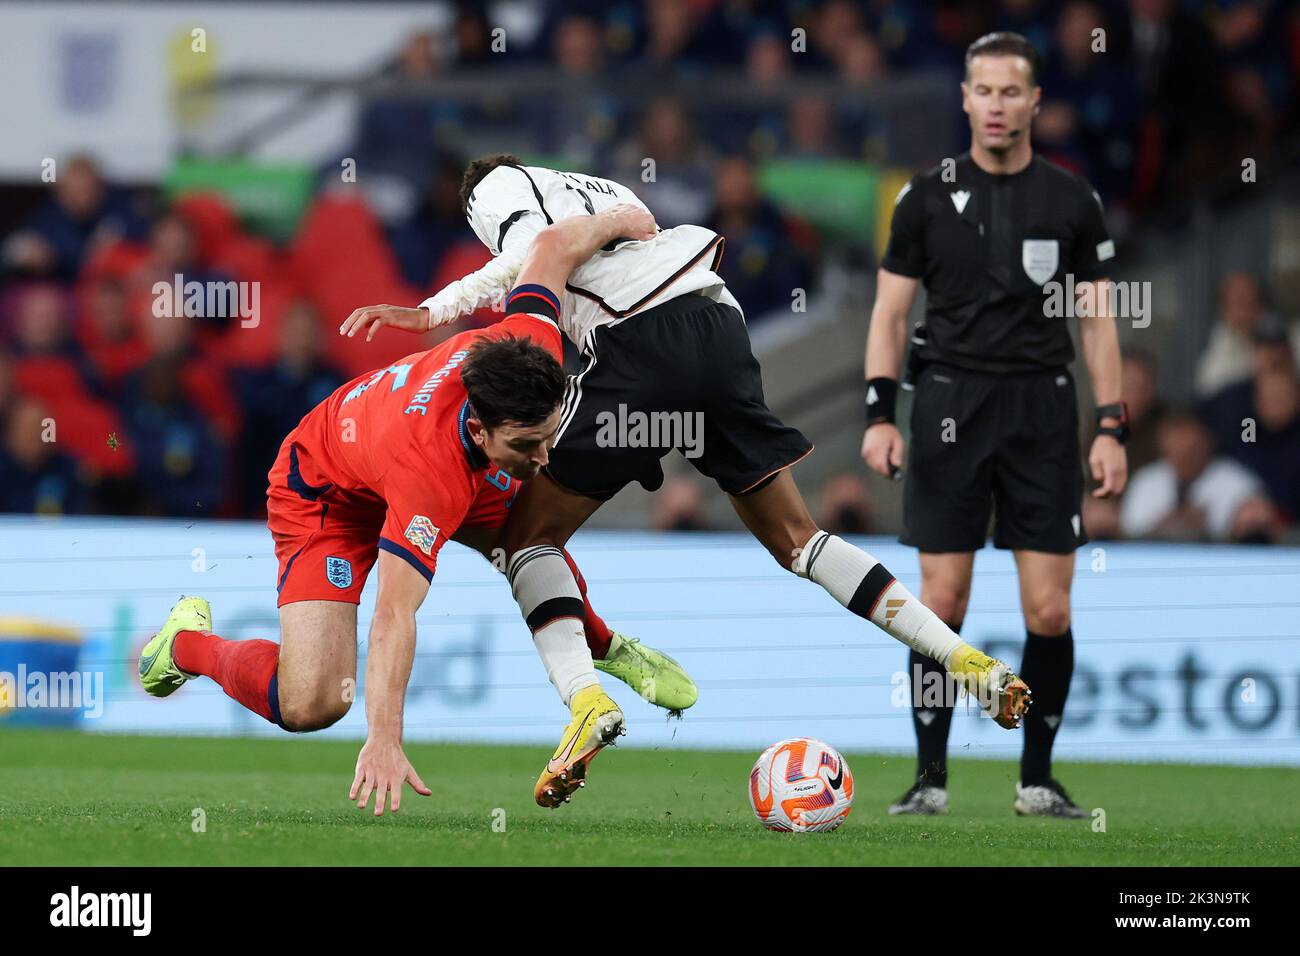 London, UK. 26th Sep, 2022. Harry Maguire of England (l) tackles Jamal Musiala of Germany. England v Germany, UEFA Nations league International group C match at Wembley Stadium in London on Monday 26th September 2022. Editorial use only. pic by Andrew Orchard/Andrew Orchard sports photography/Alamy Live News Credit: Andrew Orchard sports photography/Alamy Live News Stock Photo